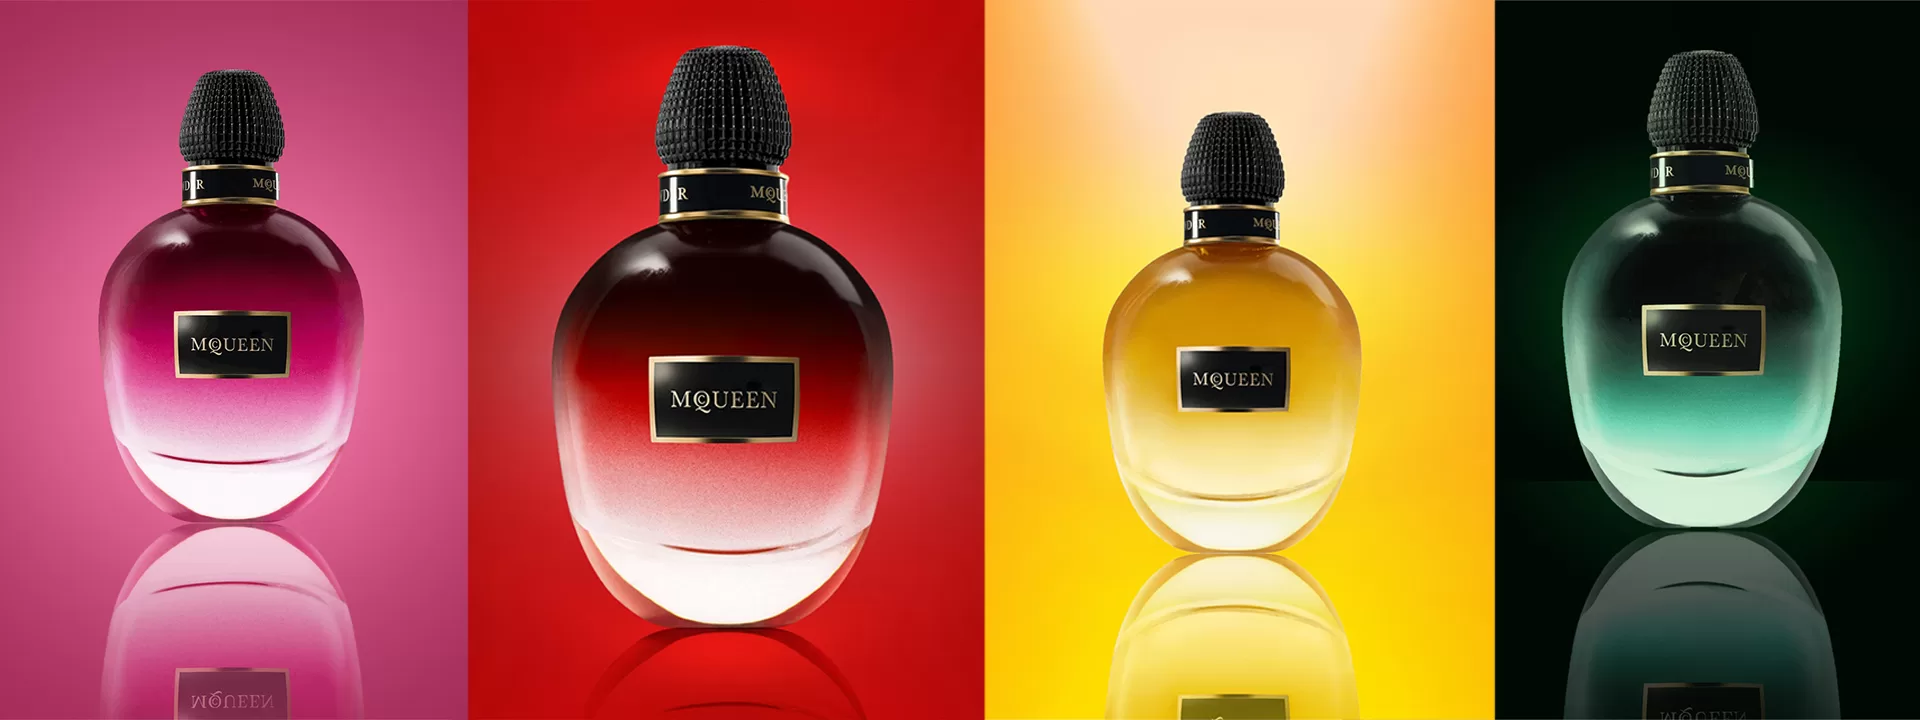 The Ultimate Guide To The Alexander McQueen Fragrances